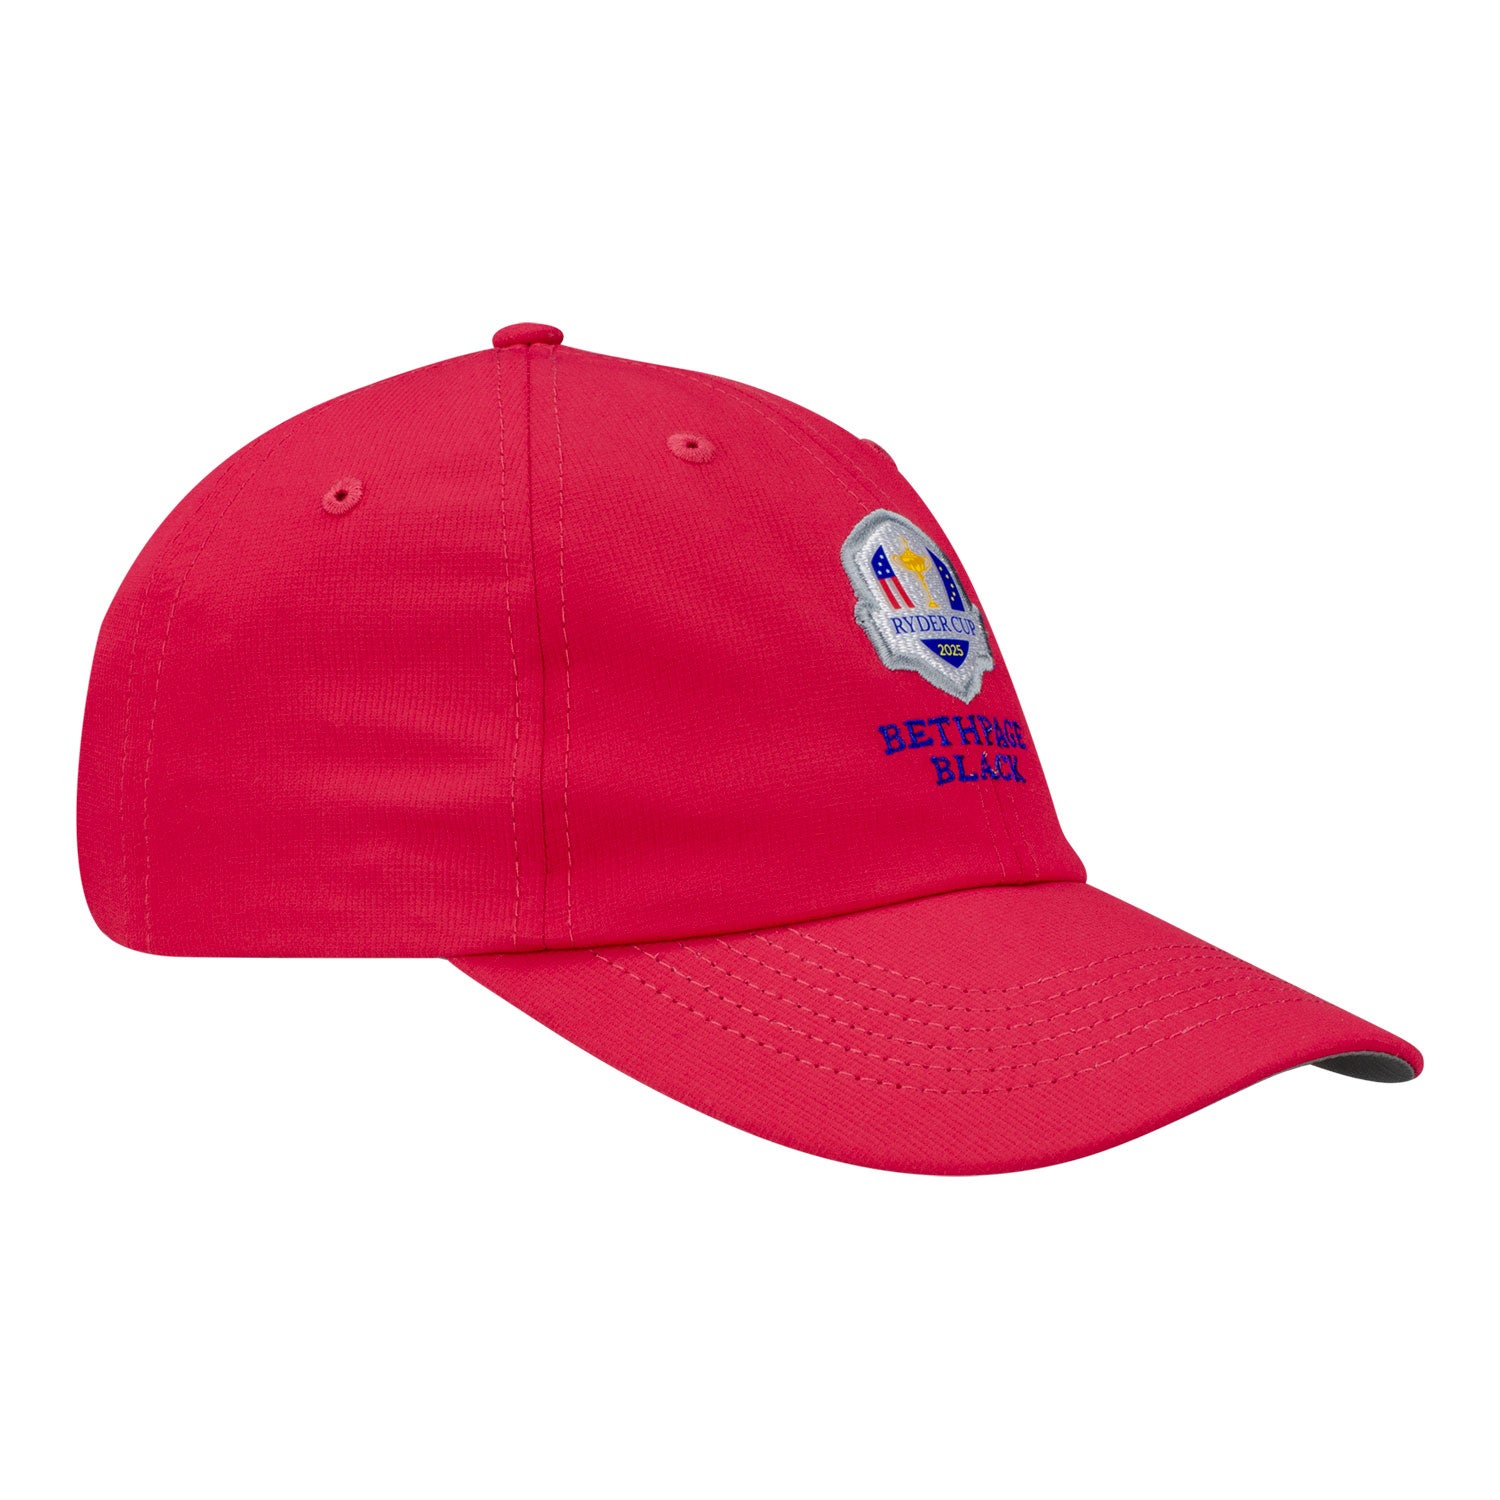 Imperial 2025 Ryder Cup Original Performance Hat in Nantucket Red - Angled Front Left View